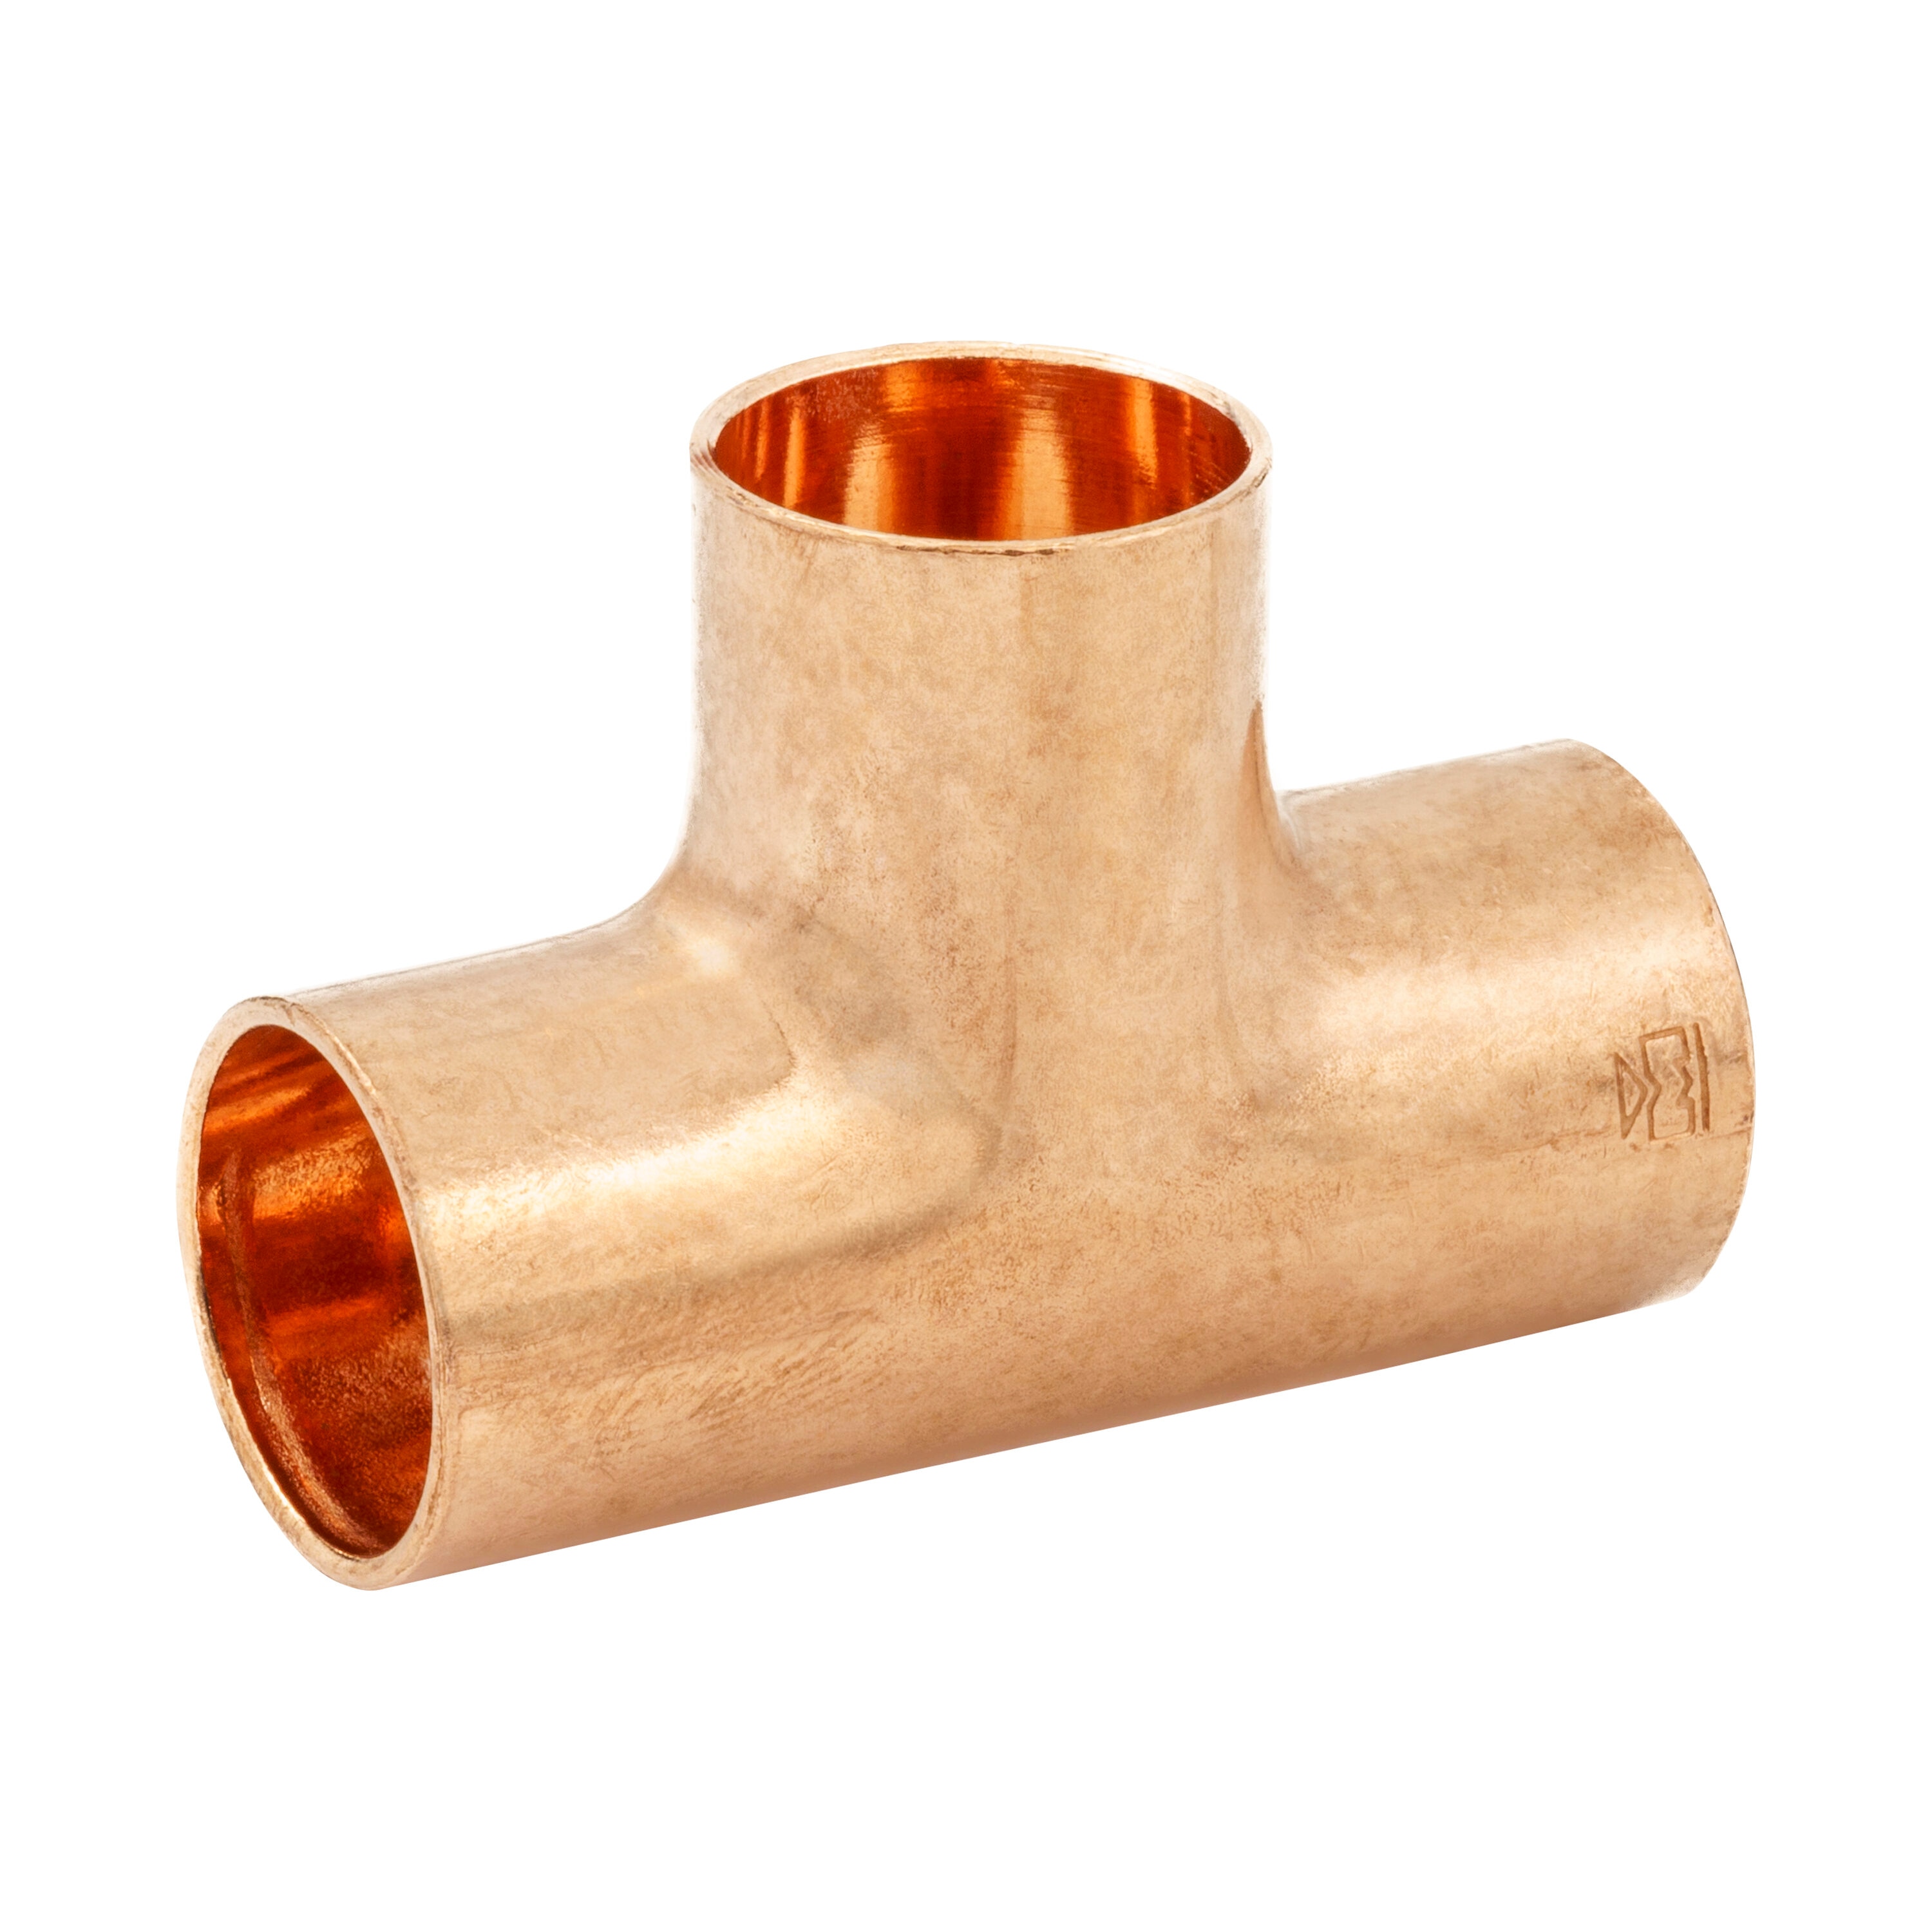 Pipe & Fittings at Lowe's